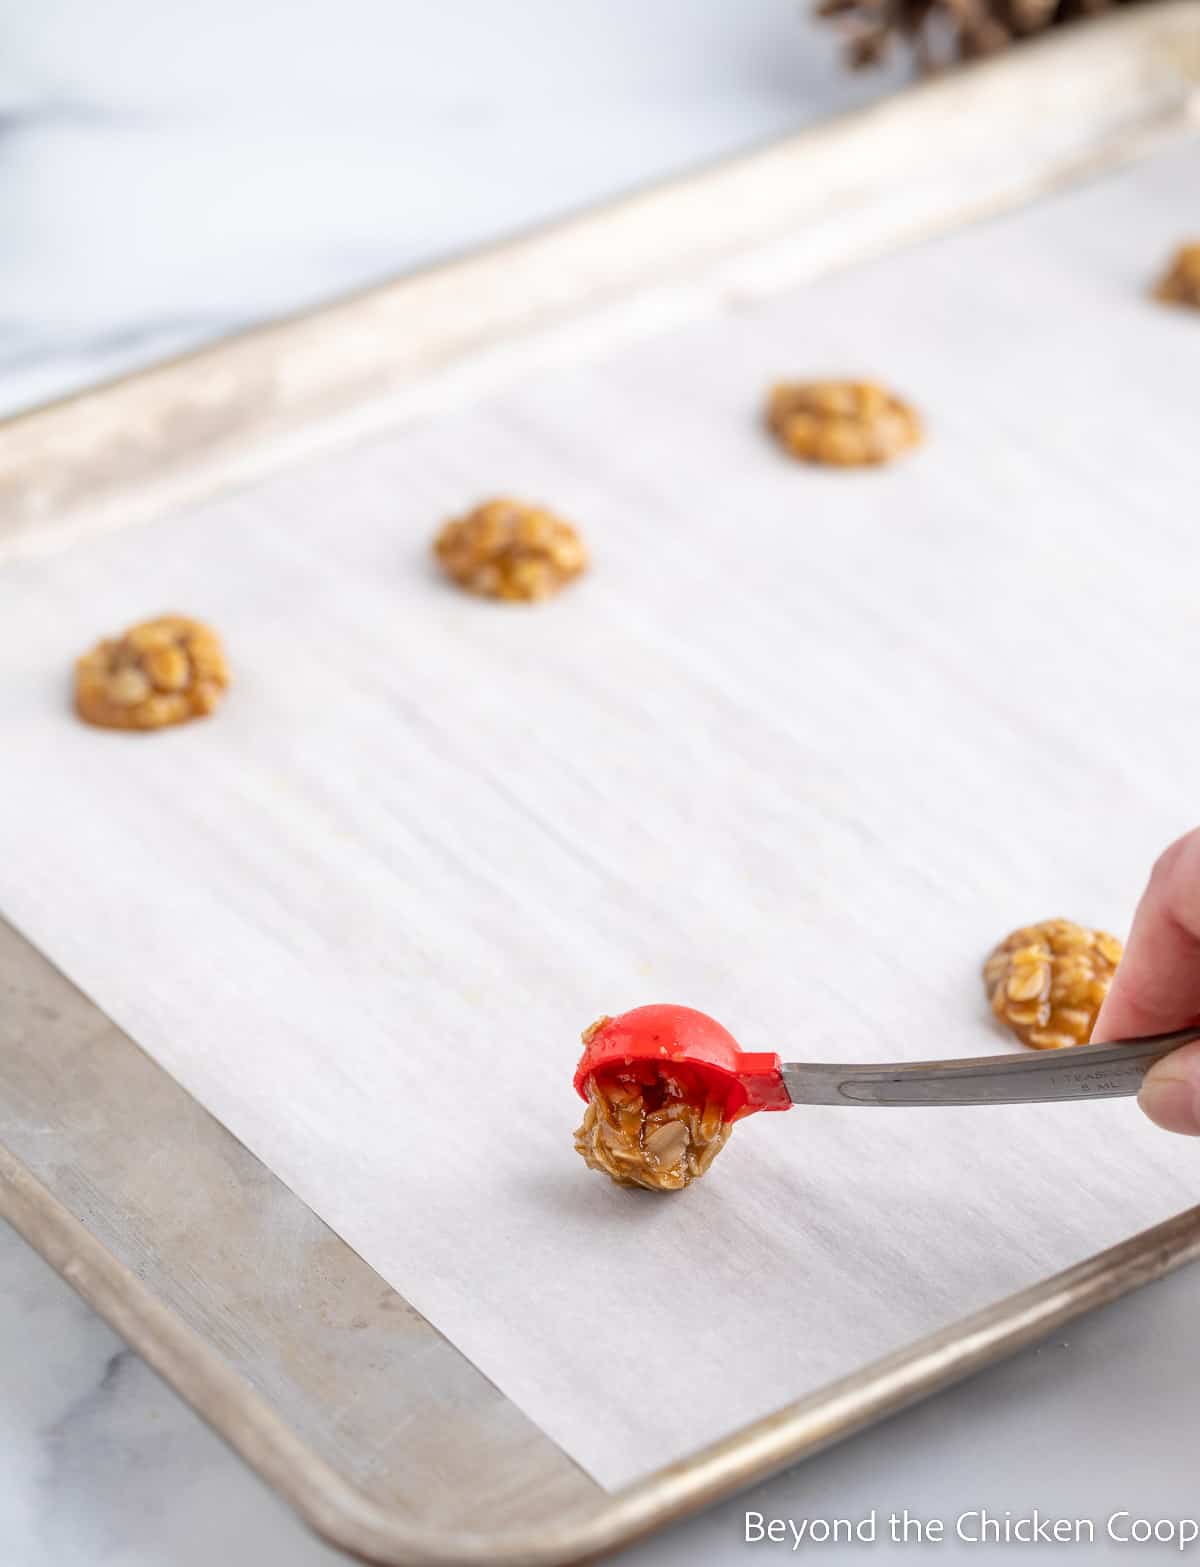 Measuring out one teaspoon of cookie batter onto a baking sheet.